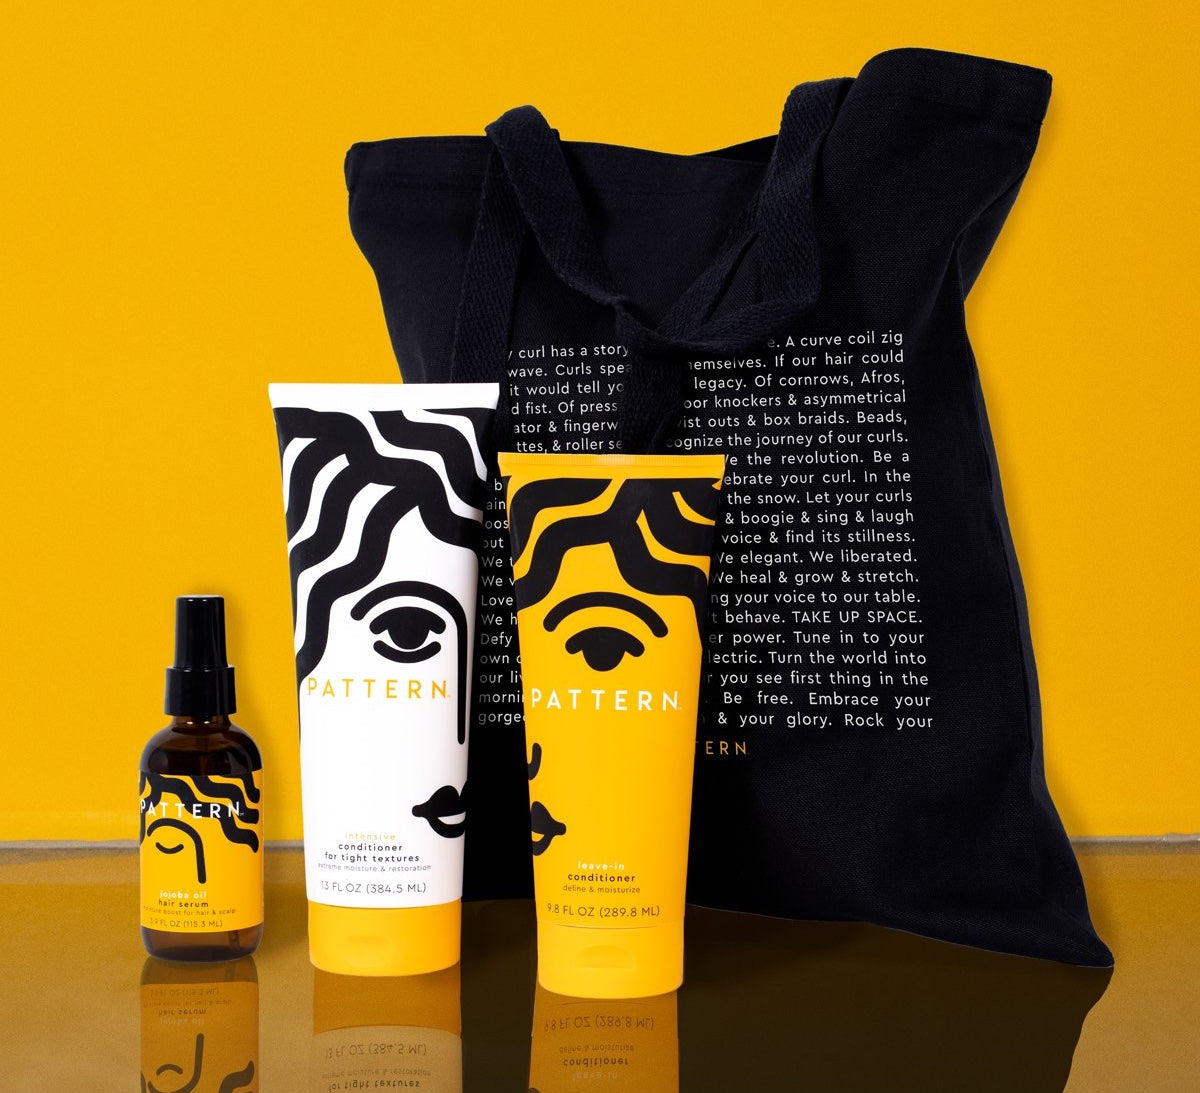 Tracee Ellis Ross Winter Hair Care Bundle against a yellow background